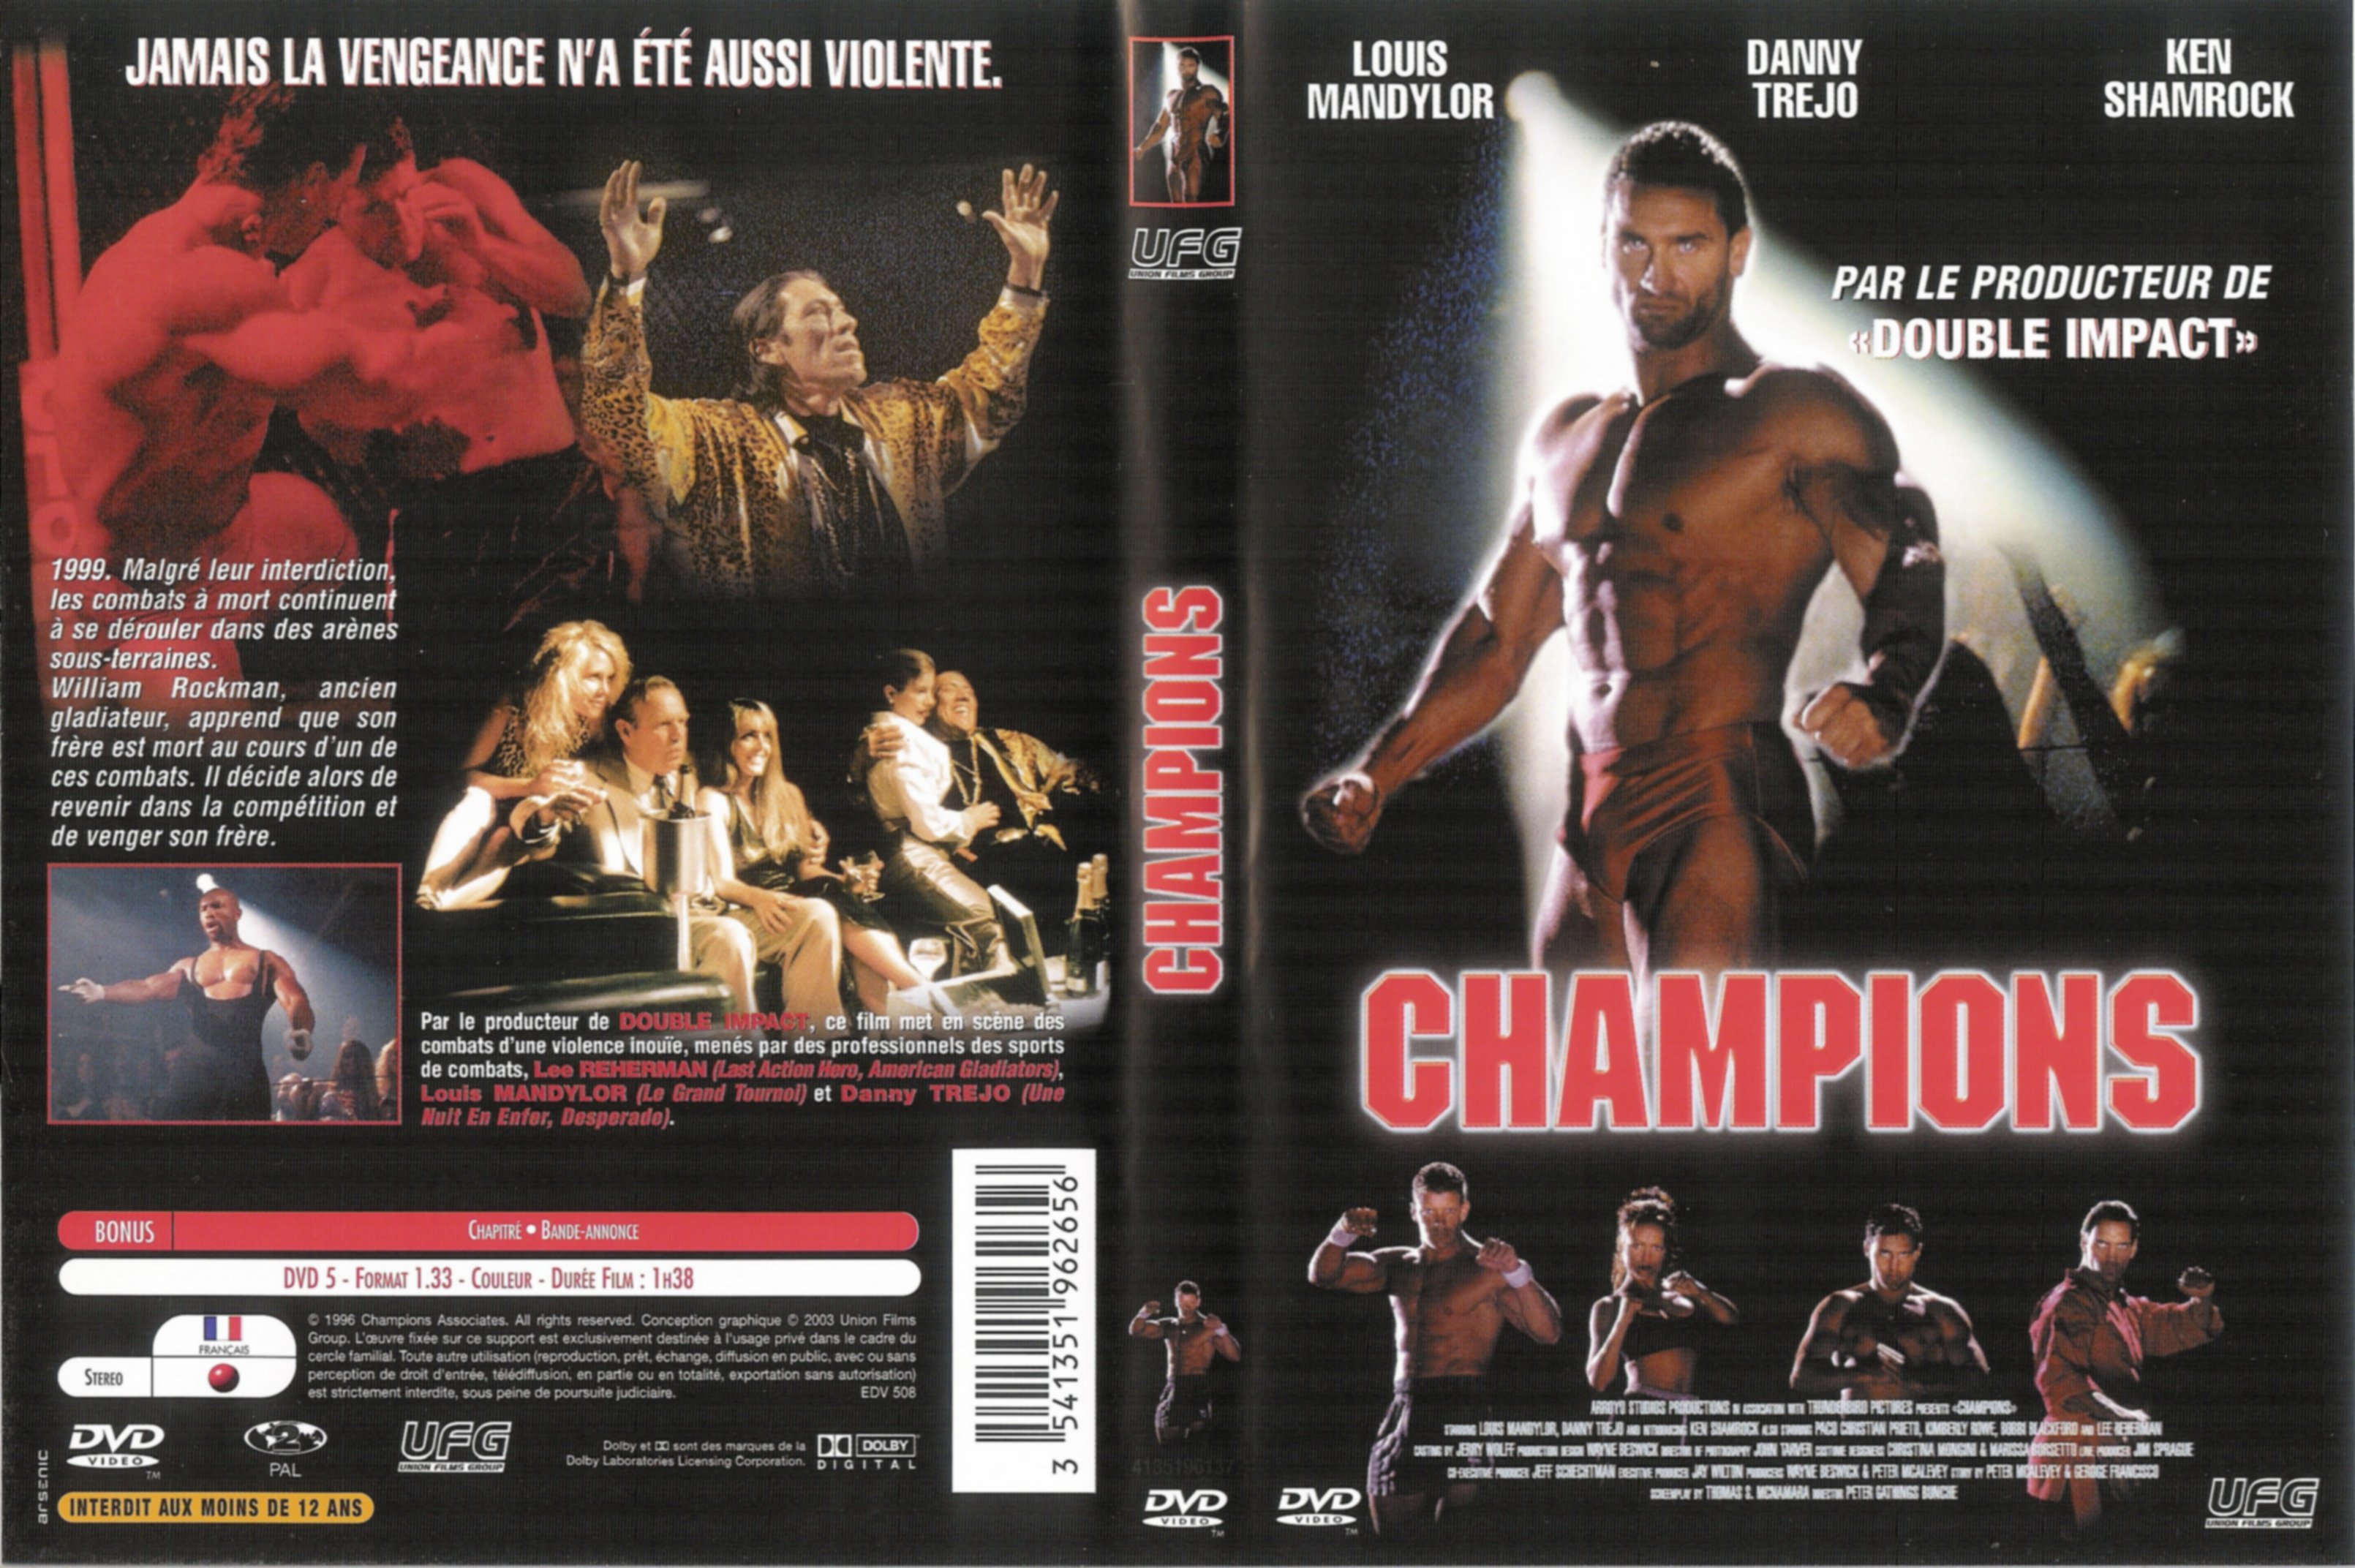 Jaquette DVD Champions